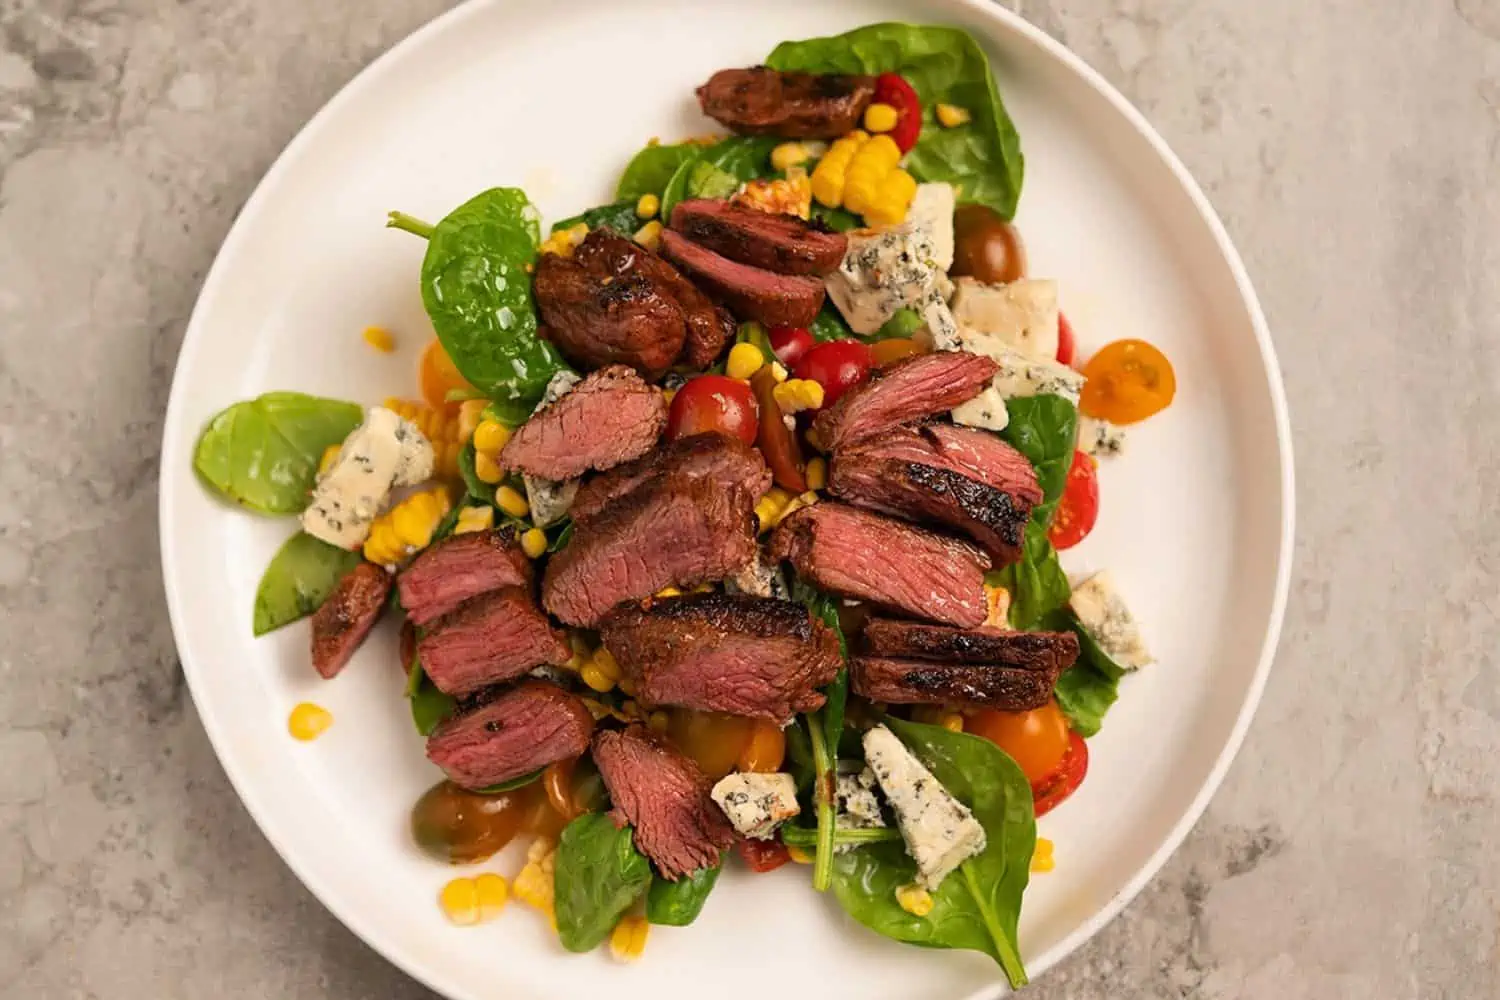 Steak and blue cheese salad